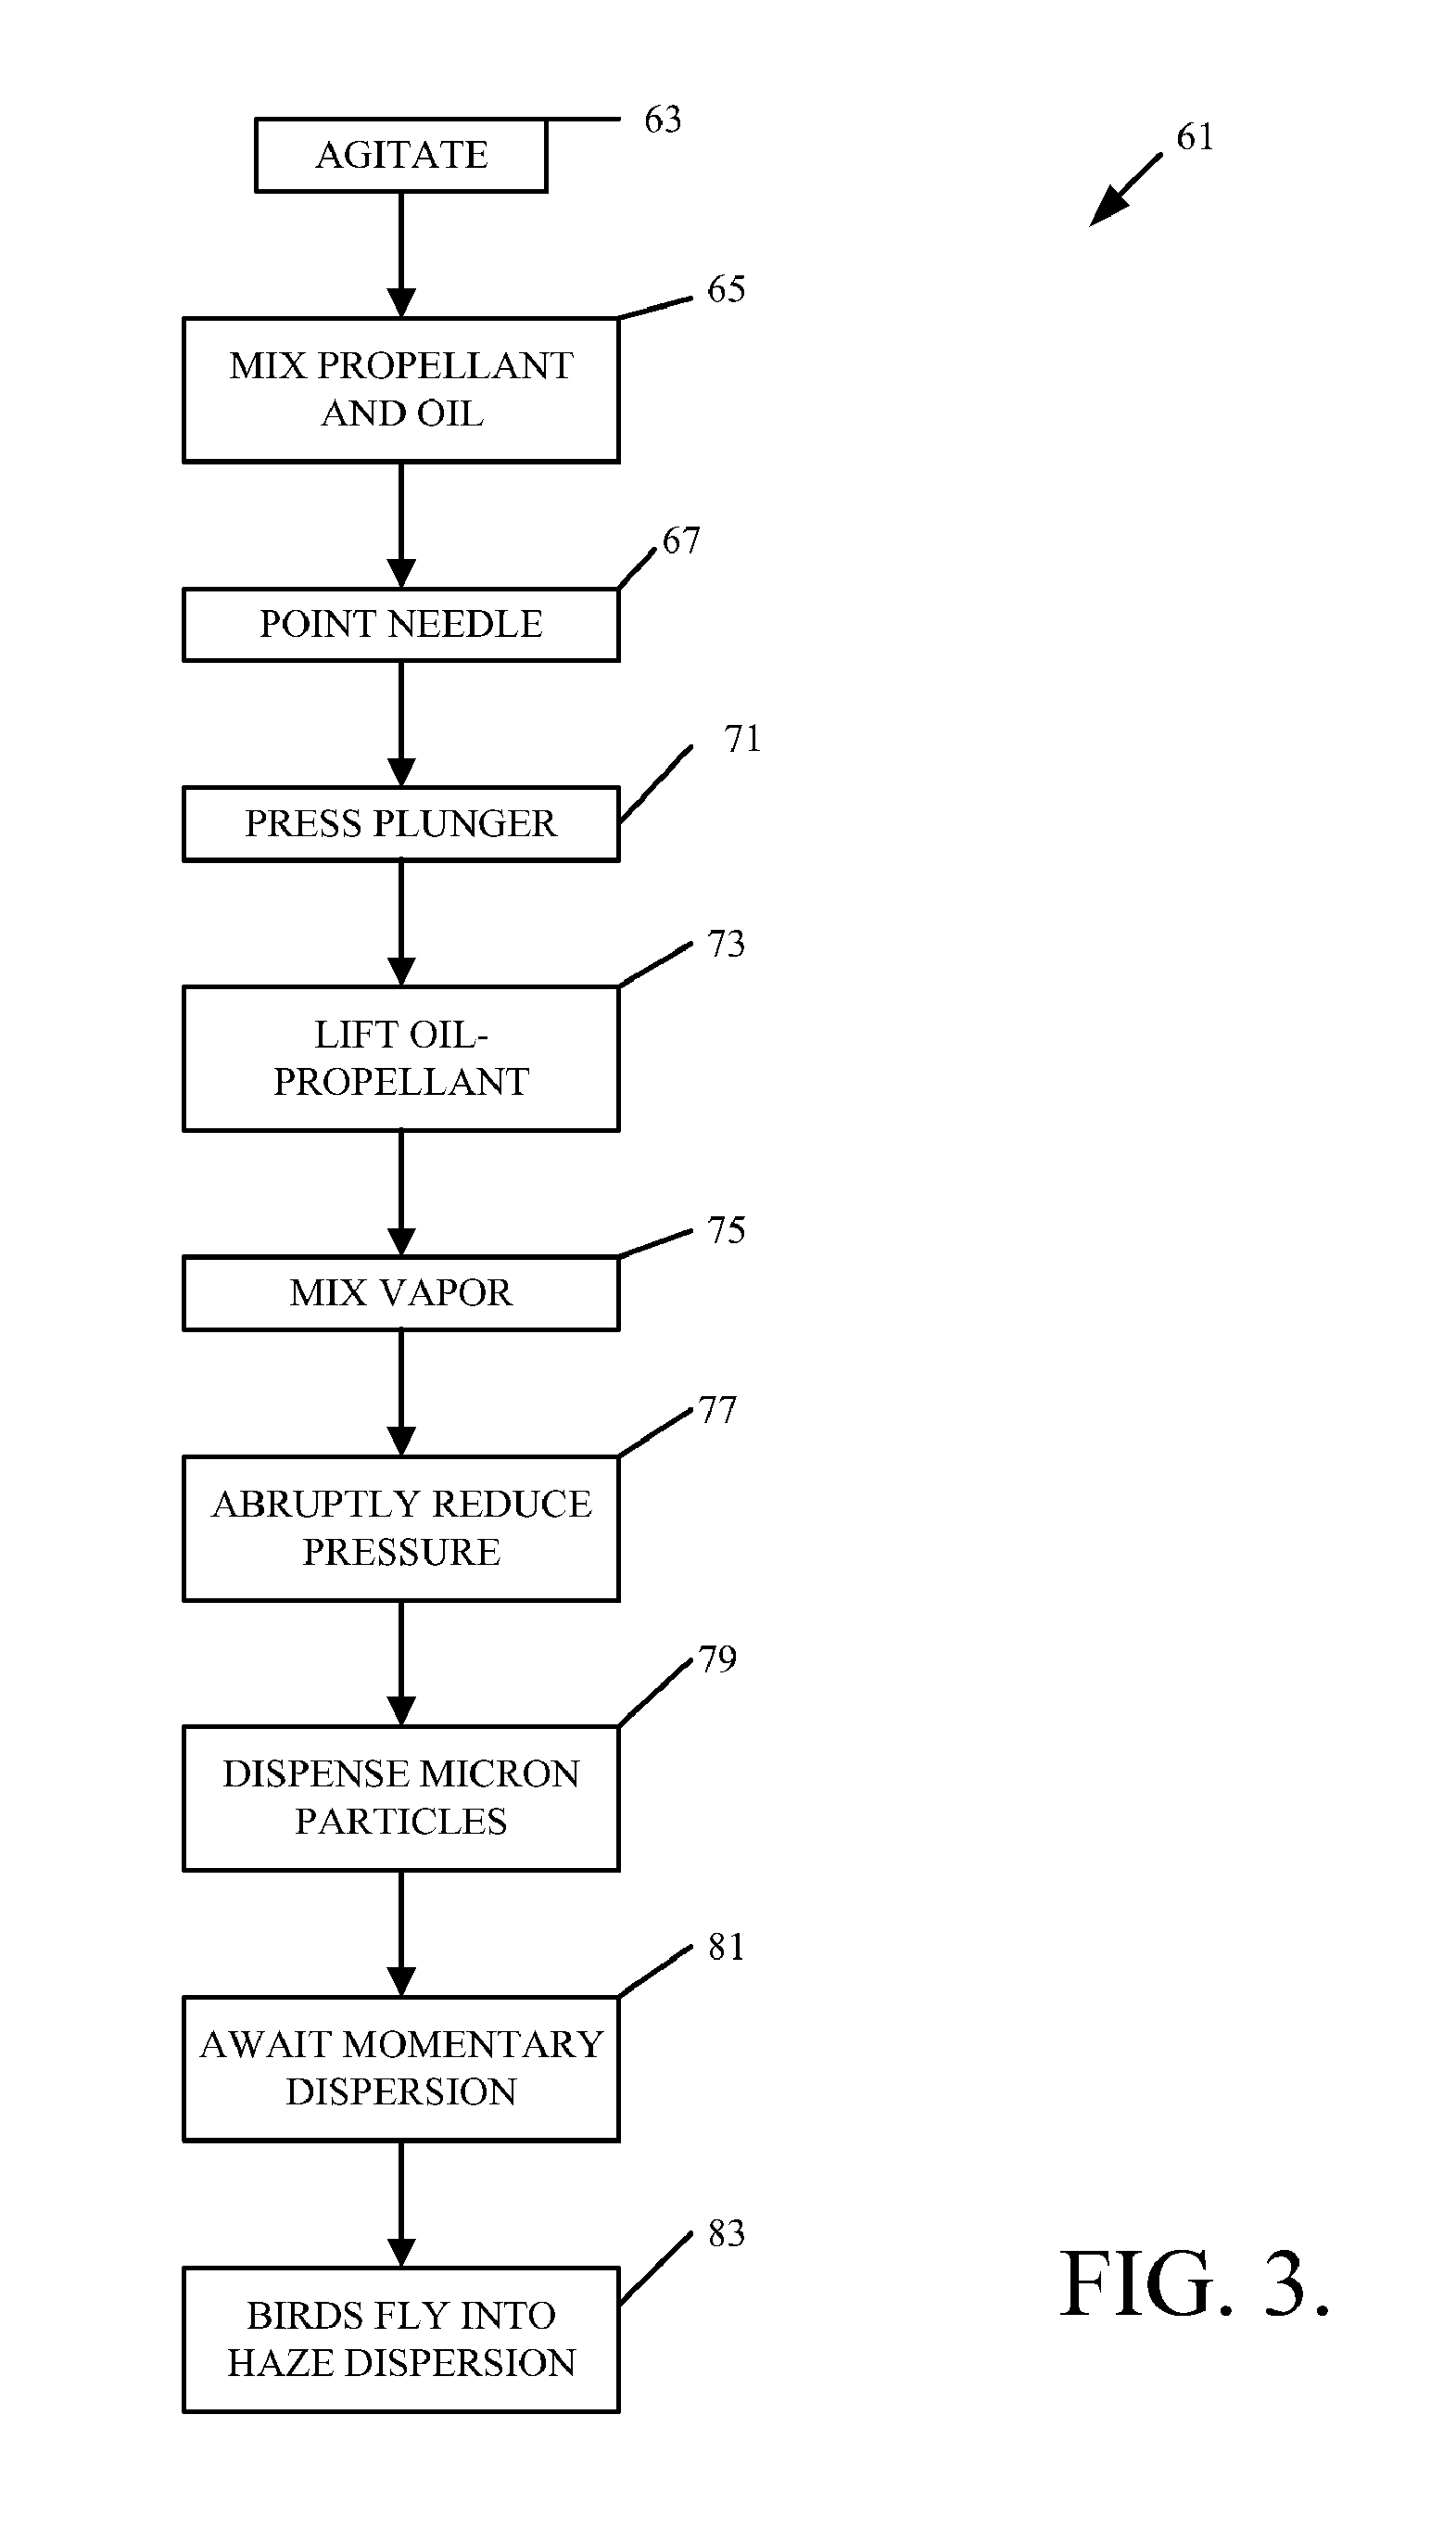 Apparatus for dispensing a bird haze product from a can